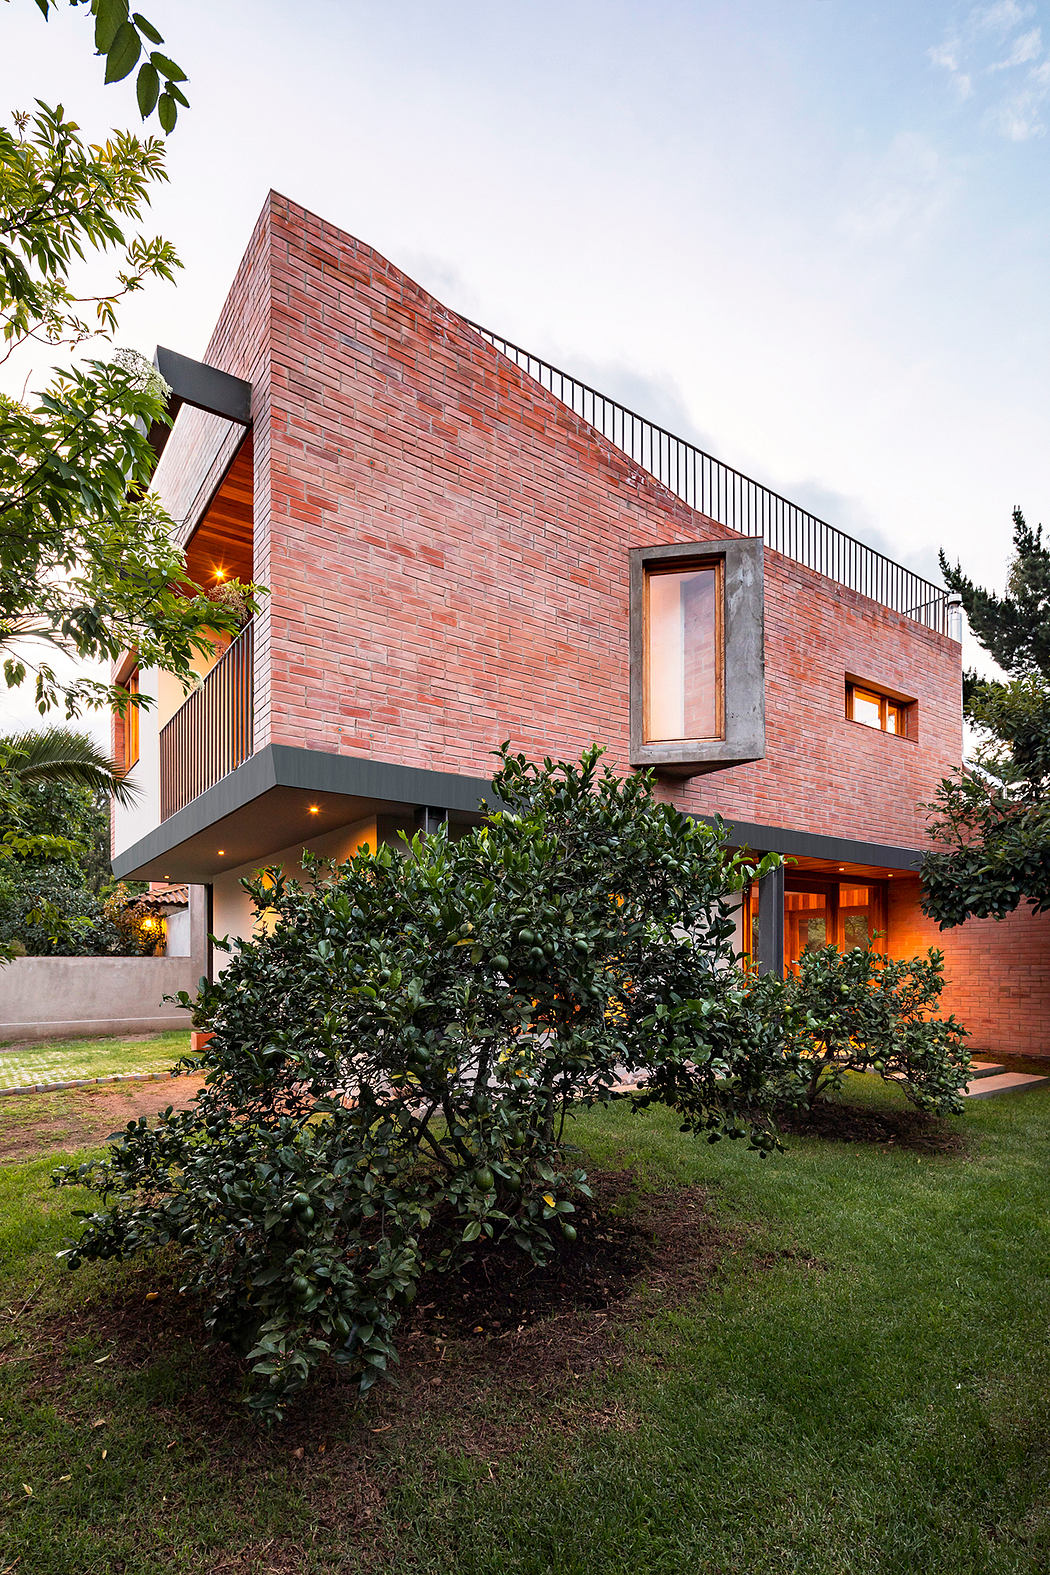 A contemporary brick building with asymmetric rooflines, surrounded by lush greenery.